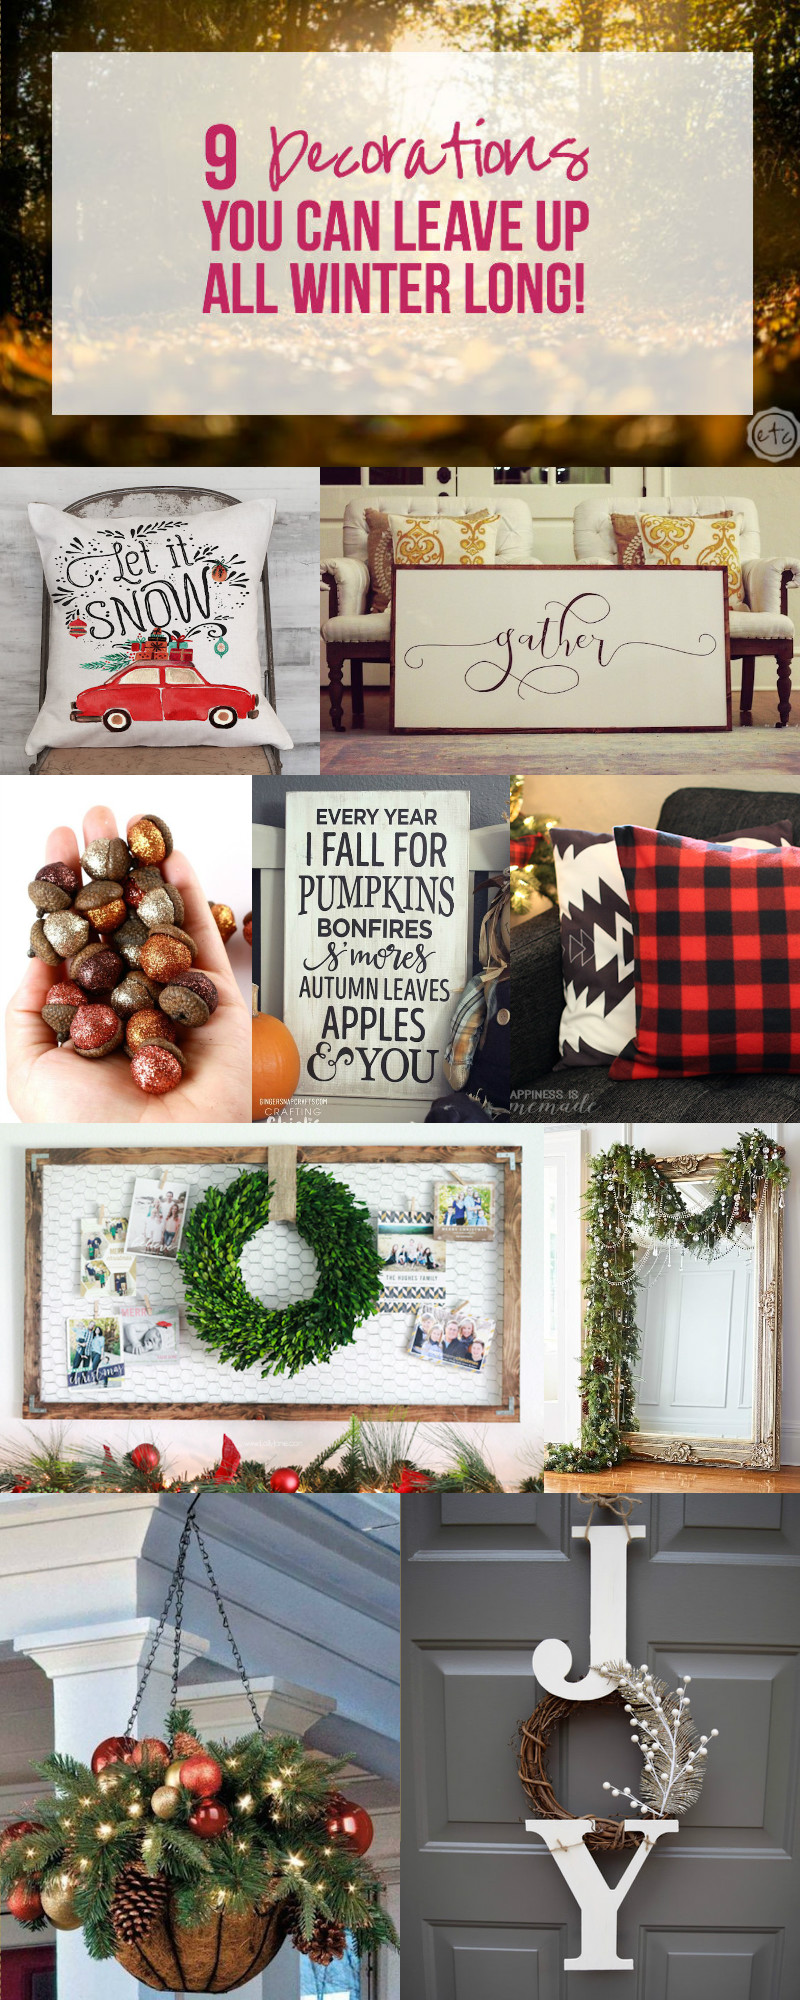 9 Decorations you can Leave up ALL Winter Long